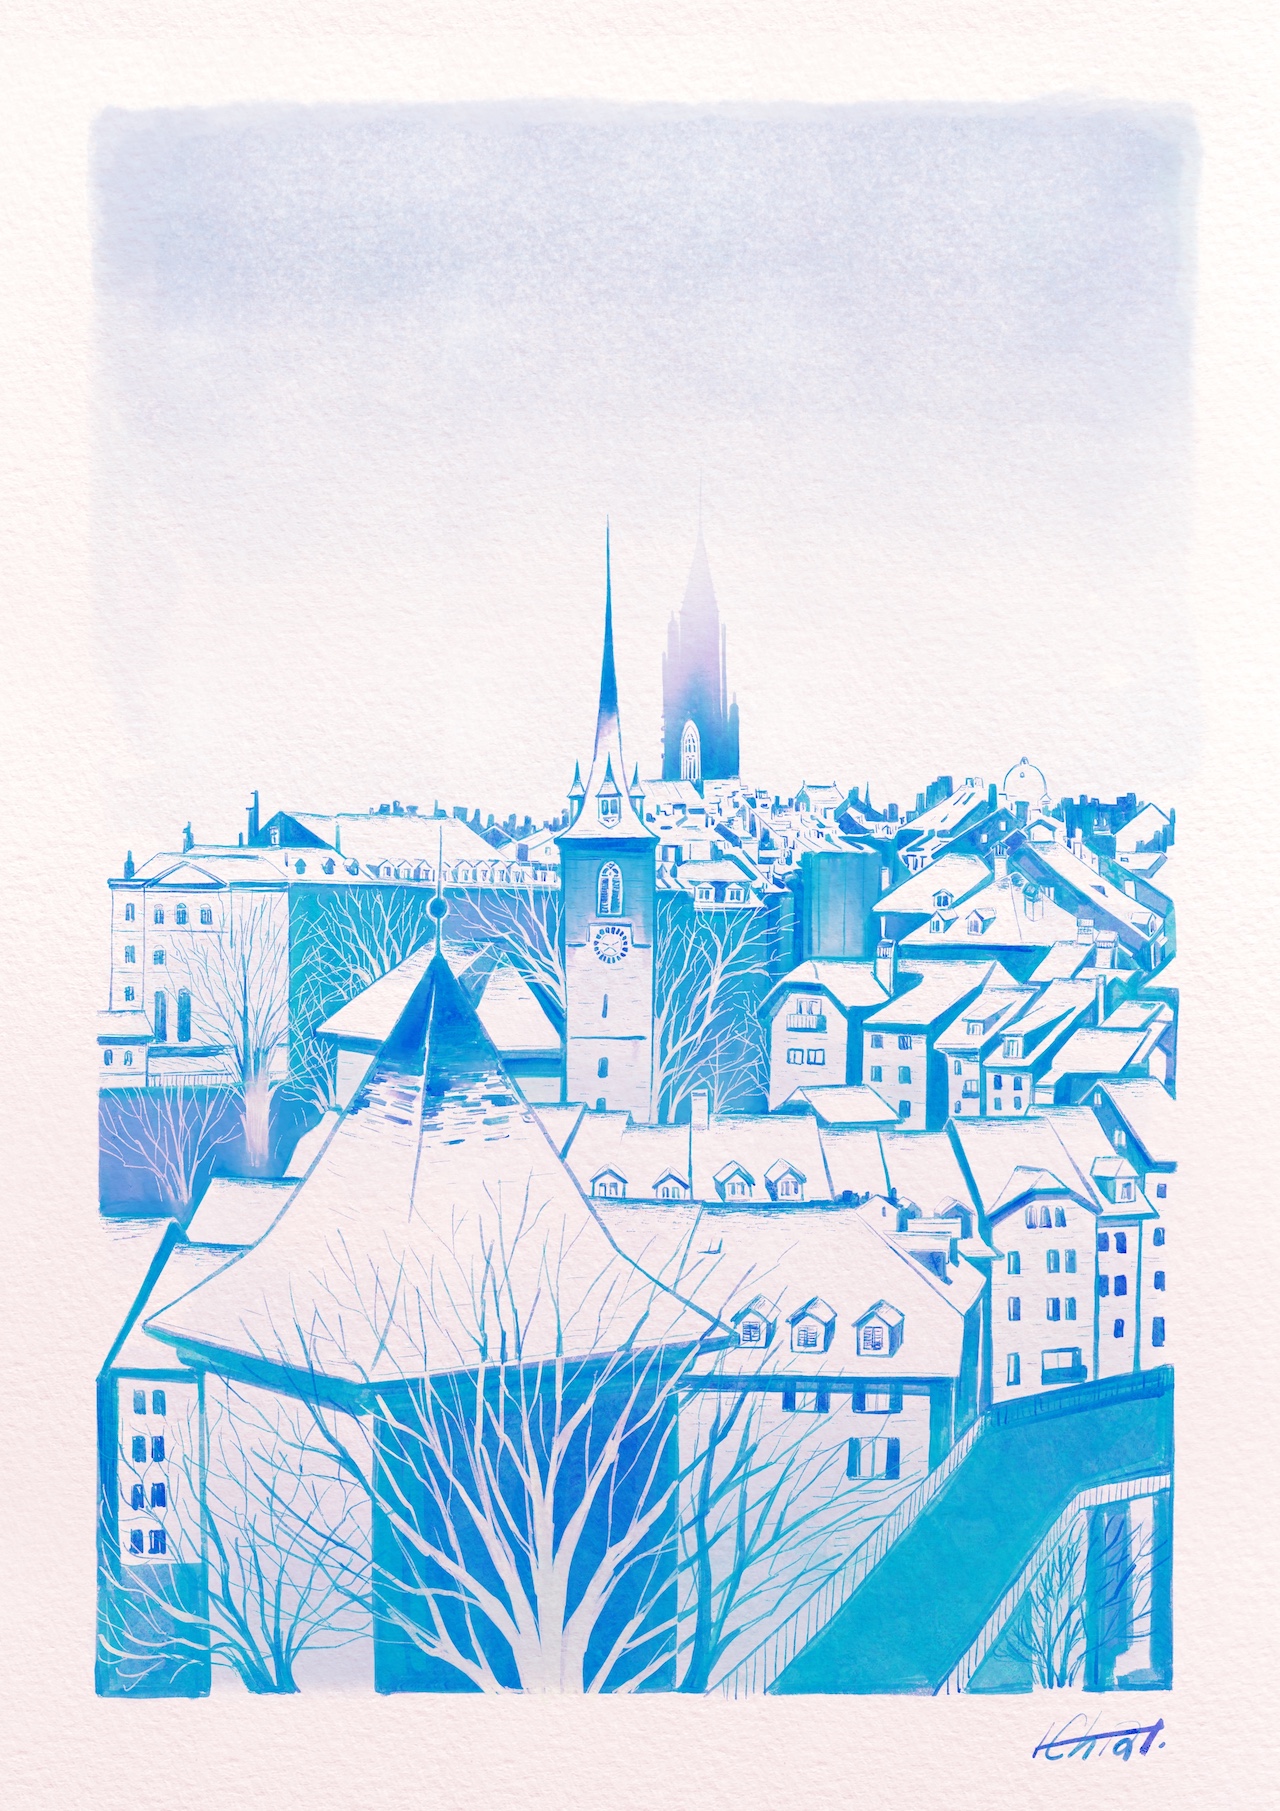 Gothic old town Bern illustration by H. Chia 笳彧 in Procreate